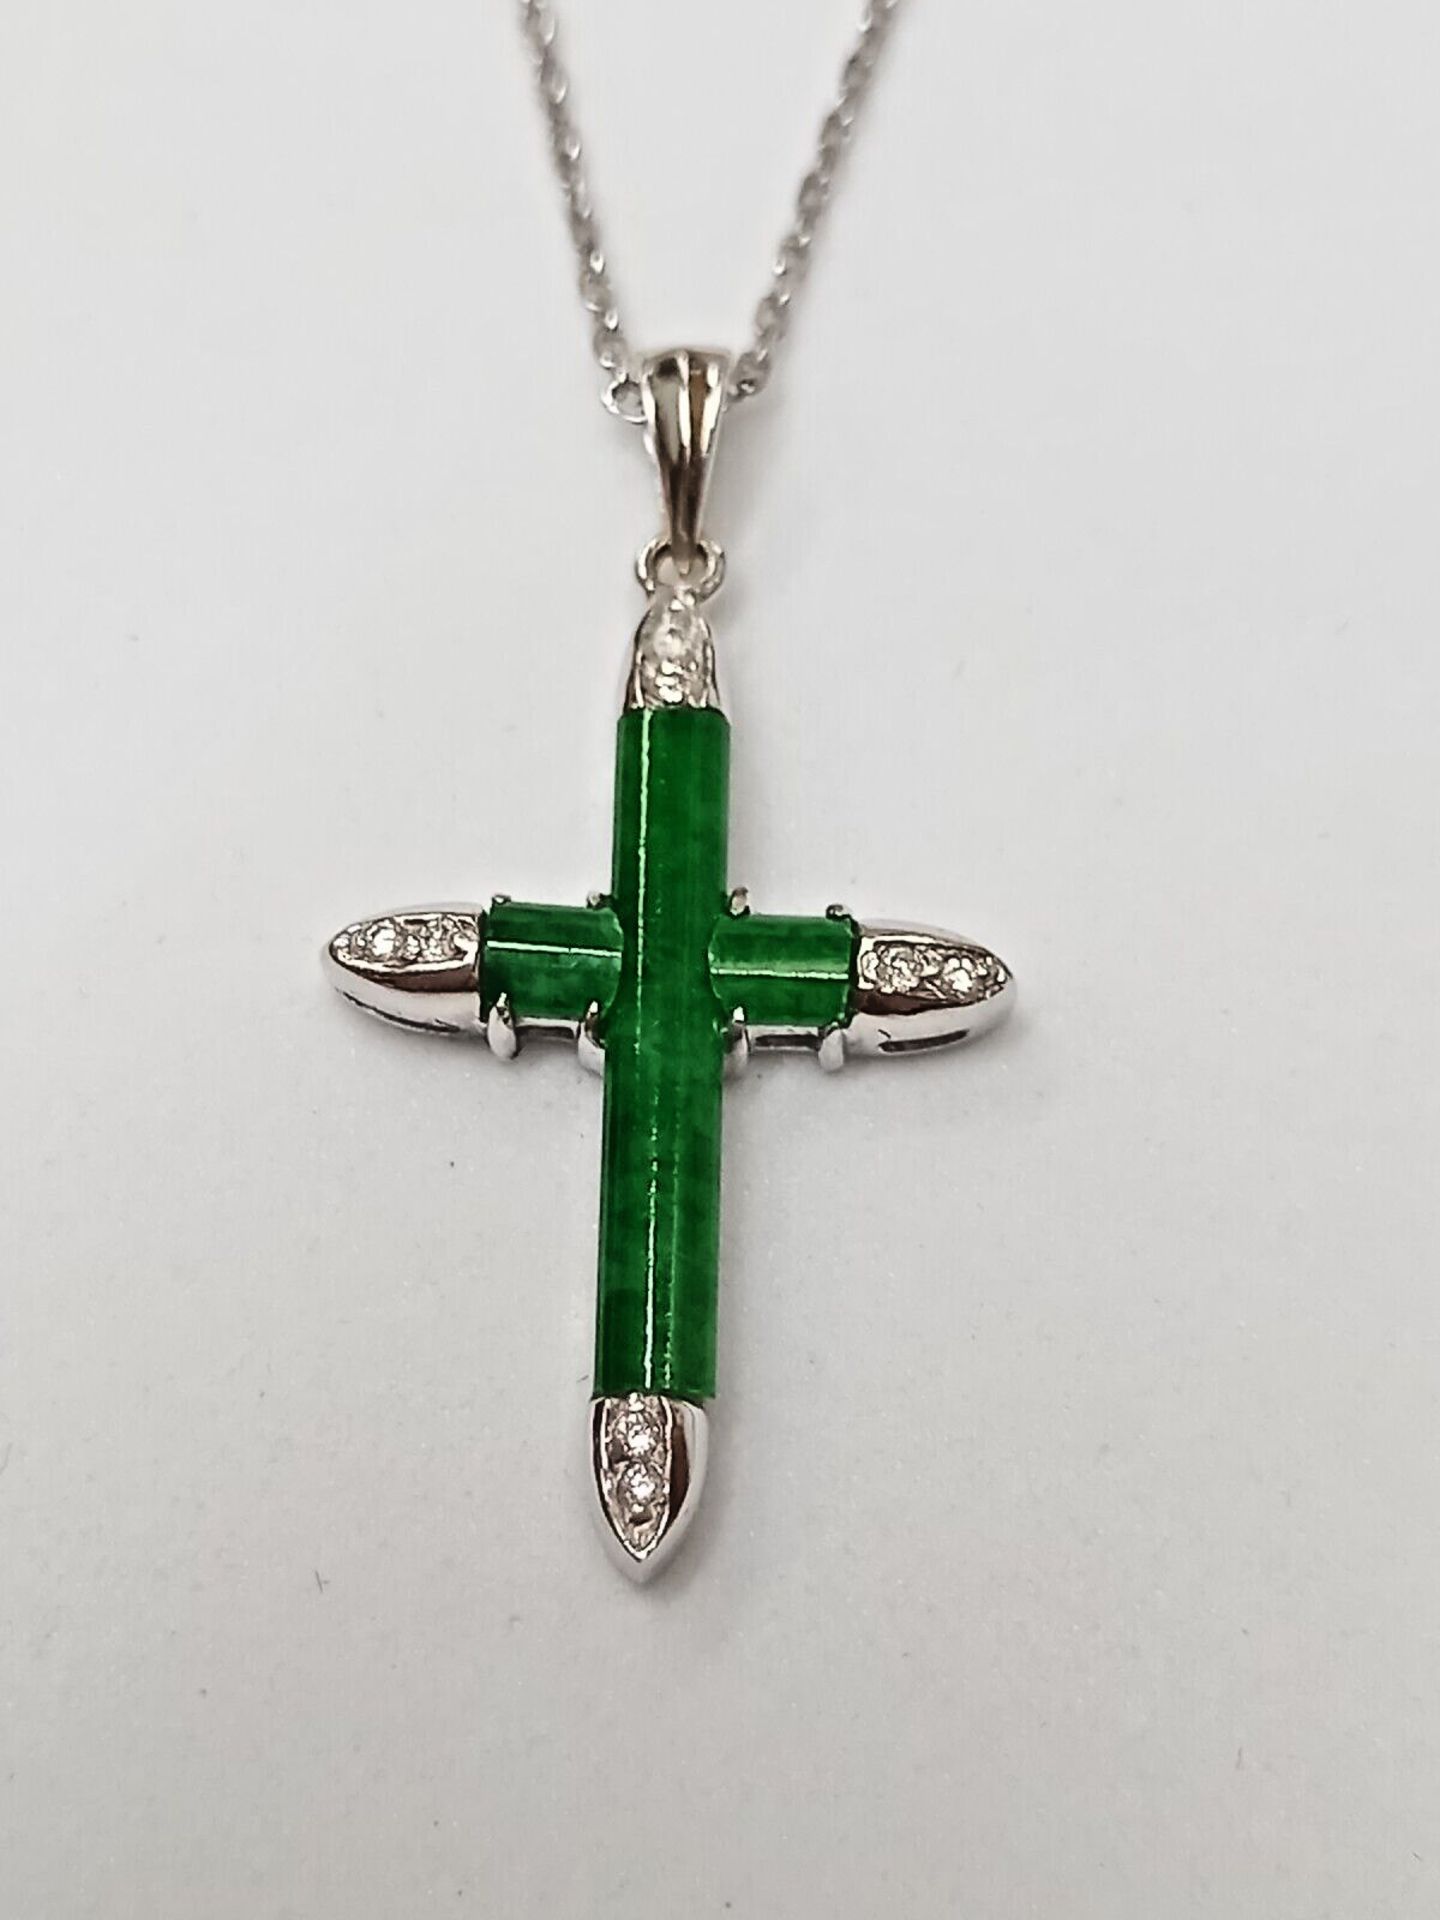 18CT JADE & 0.08CT DIAMOND CROSS PENDANT IN GIFT BOX WITH VALUATION CERTIFICATE OF £895 - Image 3 of 5